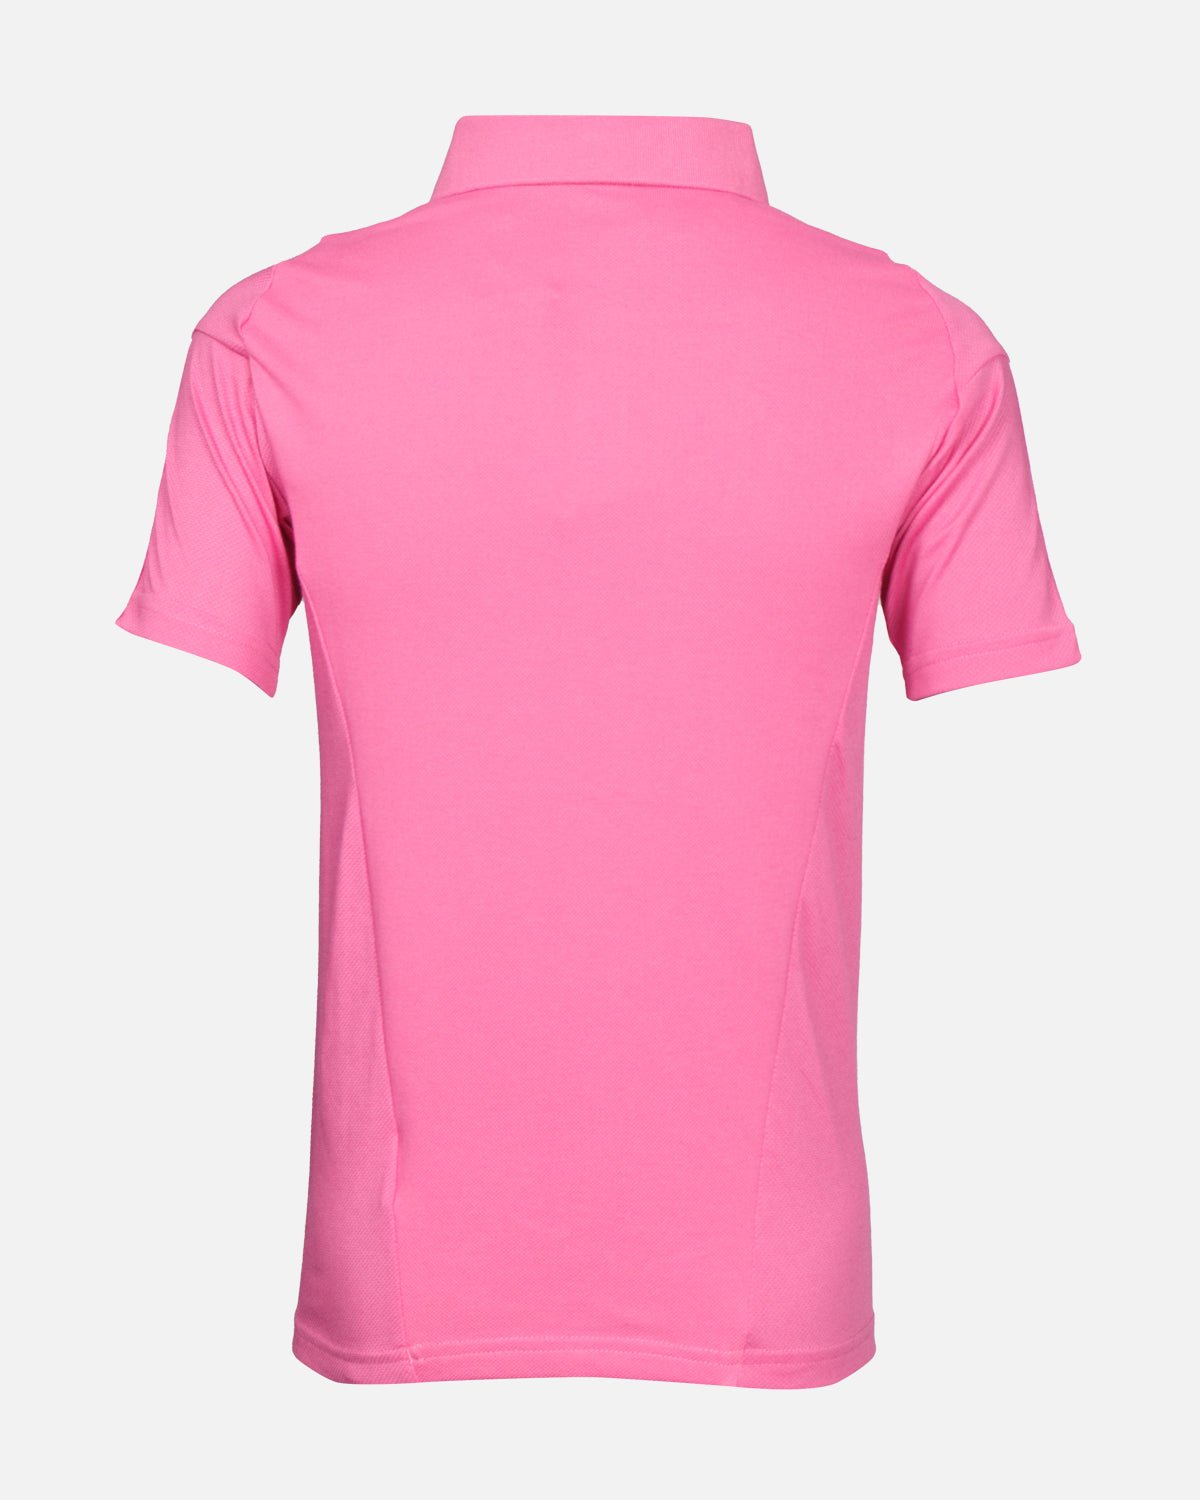 NFFC Junior Pink Warm Up Polo 23-24 - Nottingham Forest FC